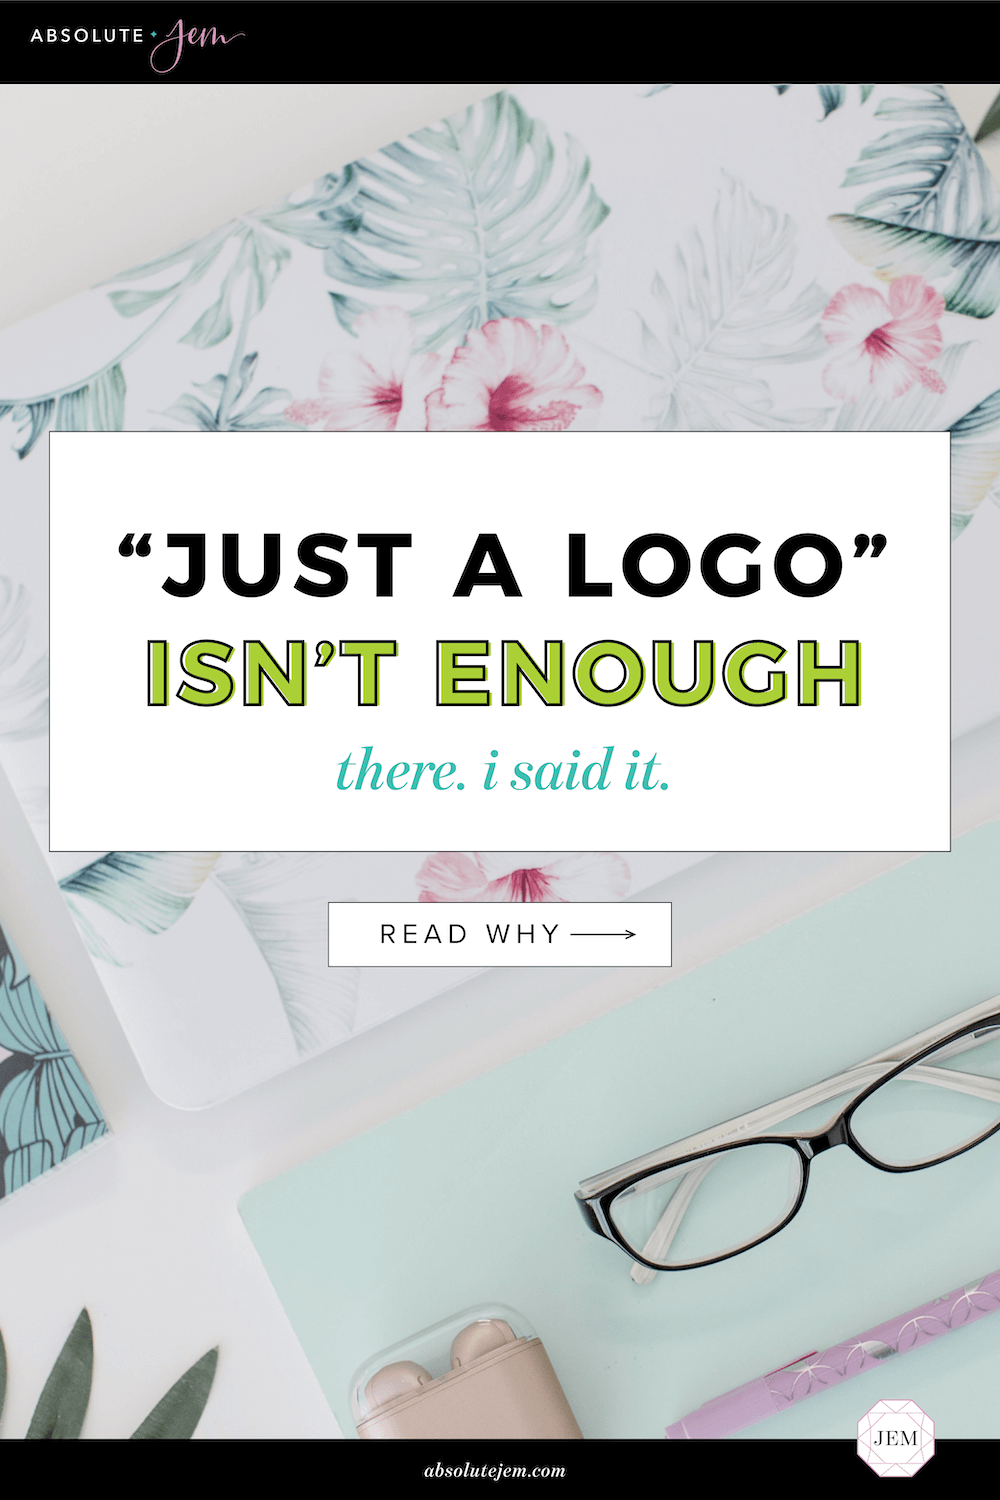 Why Just A Logo Isn't Enough | Absolute JEM